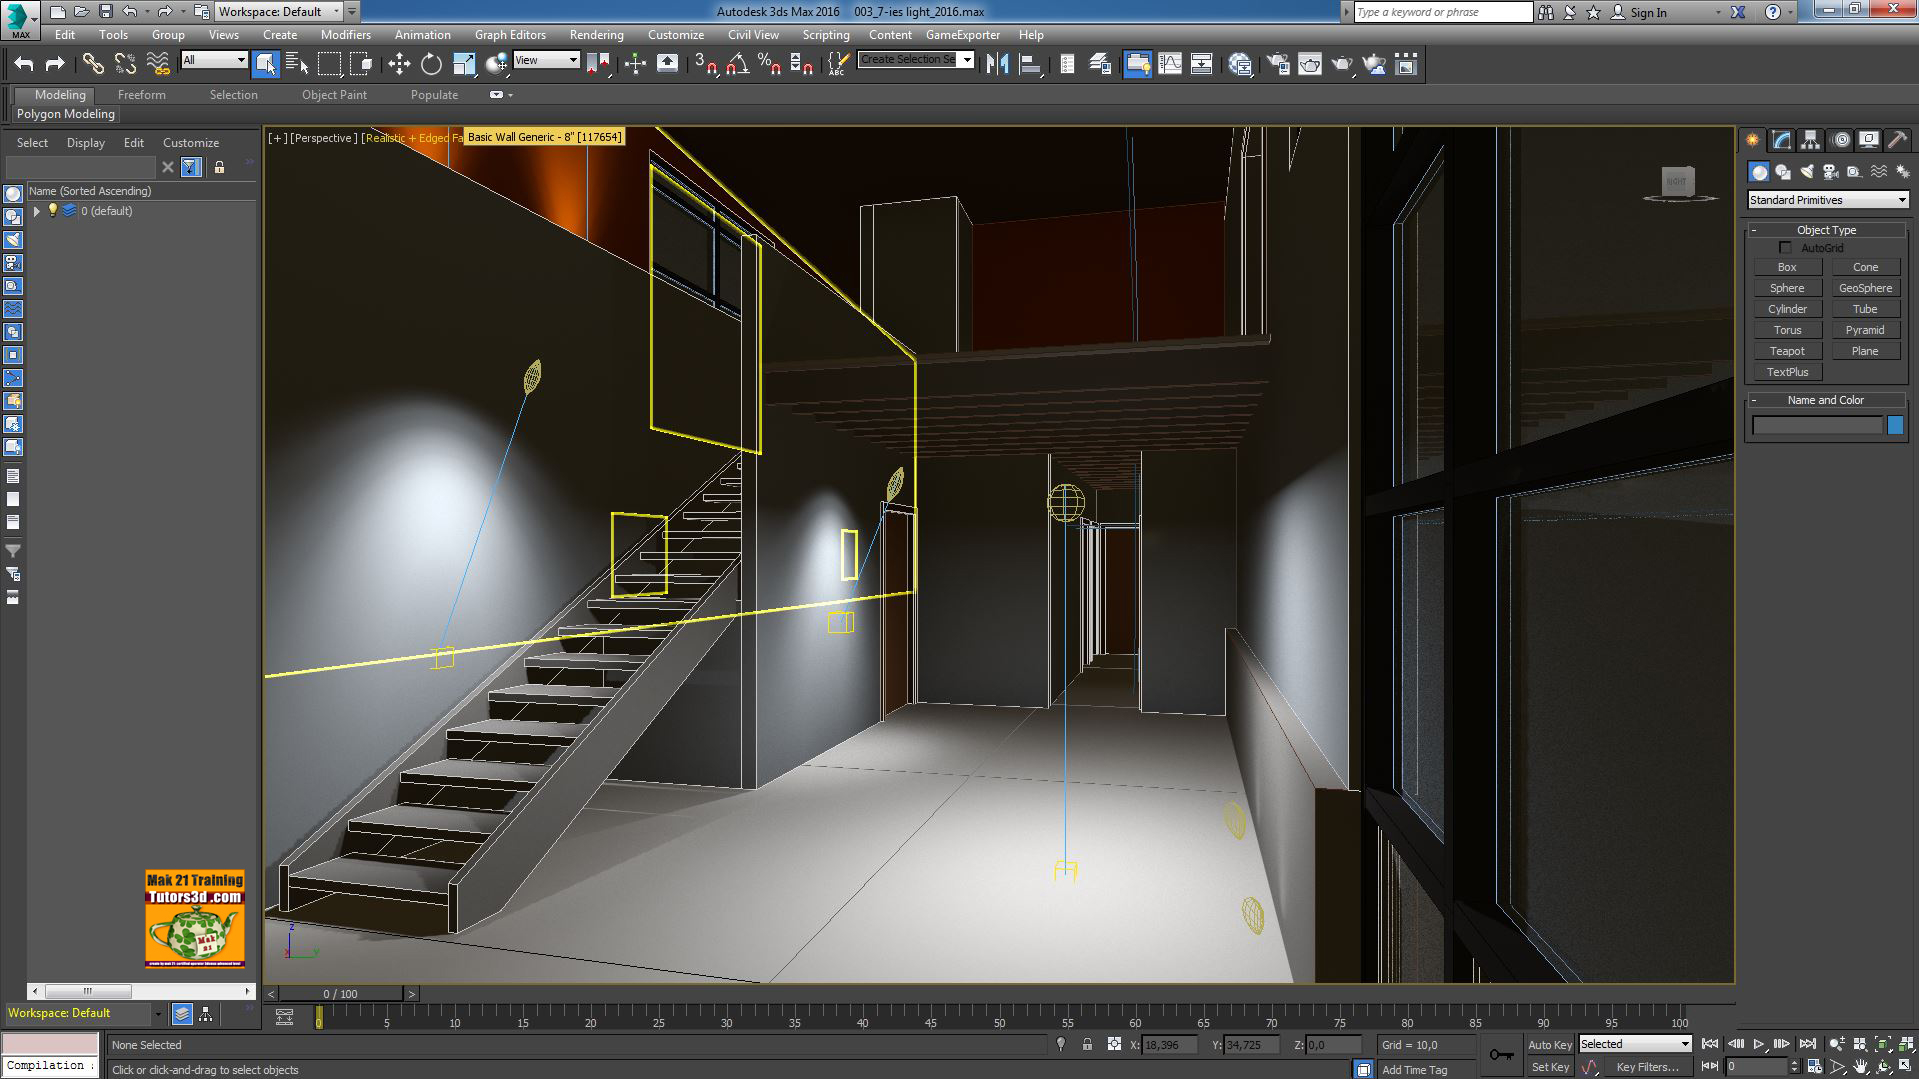 3ds max student version